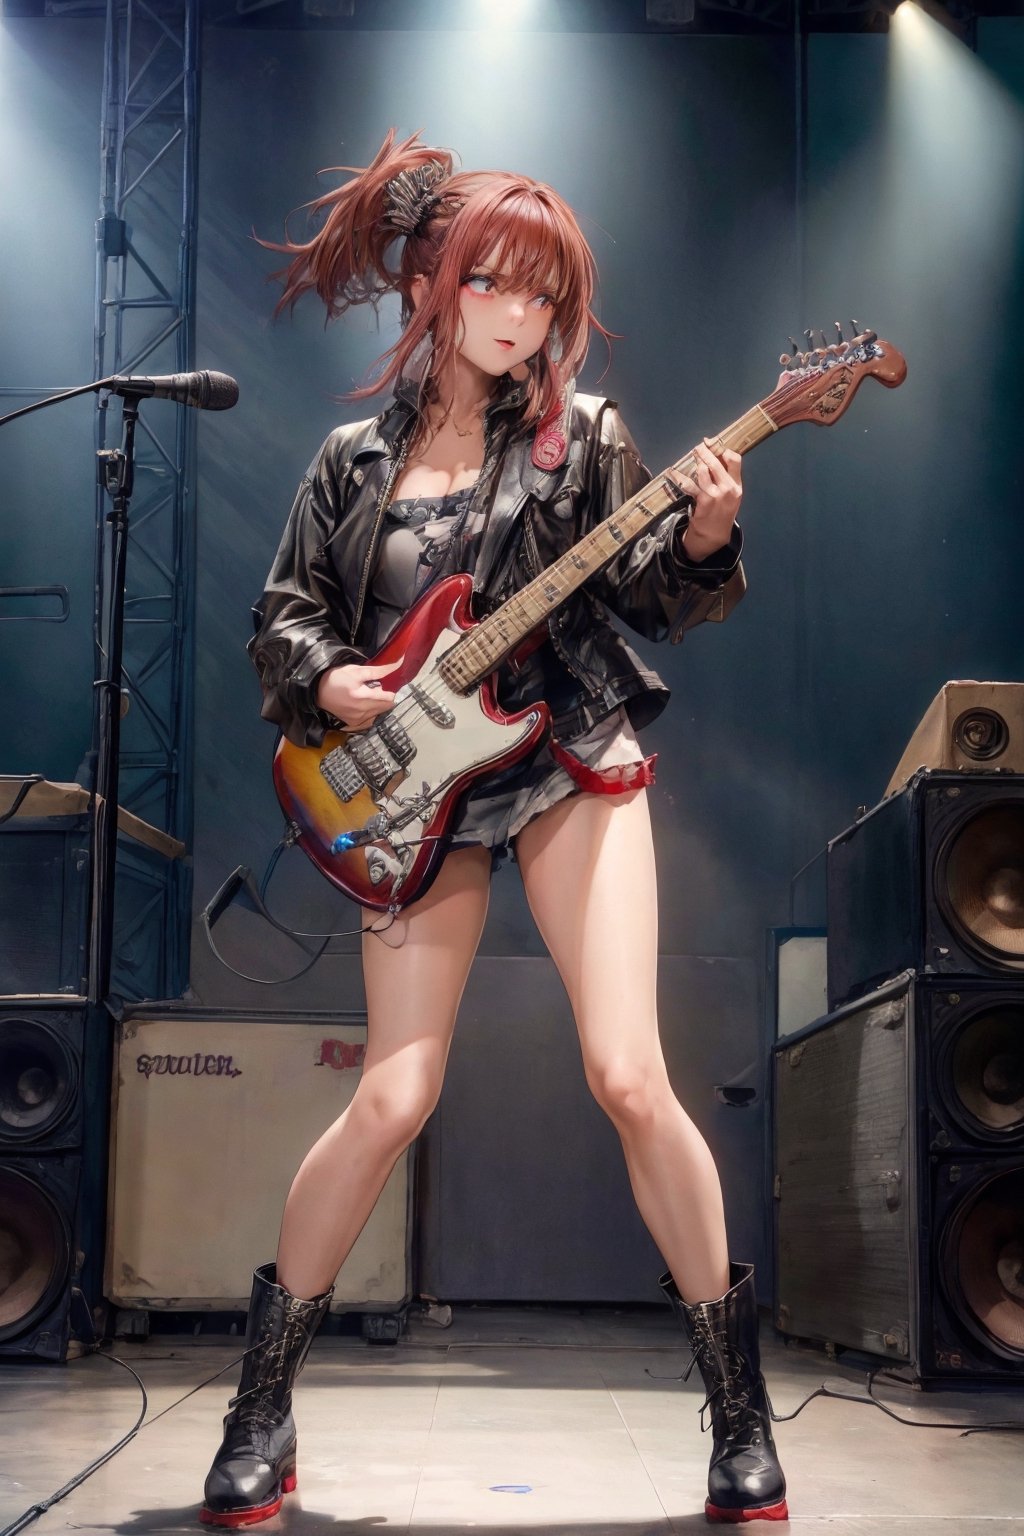 (wideshot), (long shot ), ((full body)) image of a British rock band's lead guitarist, 29 years old, personifying raw energy and charisma, with a lean, angular face, dynamically placed in the (lower left of the frame). She's on a vibrant festival stage, electric guitar in her hand, in the midst of an electrifying solo, the crowd roaring in the background.

Her spiked long curledhair is a statement in itself, mirroring the rebellious spirit of her music. Her eyes, ablaze with the thrill of performance, are not on the camera but are fixed on the sea of fans, her lips parting in a shout that melds with the guitar's wail.

She has a lithe, energetic build. Clothed in a (leather jacket adorned with band patches) and (ripped jeans), her outfit screams rock and roll. Her feet, in (sturdy combat boots), stomp and move across the stage, each step a punctuation to the raw, pulsating rhythm she commands.

((Full body shot)), (full body shown)
Low camera long  shot. (frog perspective shot) In summary, this image captures the essence of inviting and stylish beauty. film grain. grainy. Sony A7III. photo r3al,
,PORTRAIT PHOTO,
Aligned eyes, Iridescent Eyes, (blush, eye_wrinkles:0.6), (goosebumps:0.5), subsurface scattering, ((skin pores)), detailed skin texture, textured skin, realistic , visible skin detail, skin fuzz, dry skin, hyperdetailed face, sharp picture, sharp detailed, 
 Rembrandt lighting, ultra focus, illuminated face, detailed face, 8k resolution, ,photo r3al,Extremely Realistic, Official art quality with a strong aesthetic appeal. High resolution rendering in 4K, wild girl,Nice legs and hot body